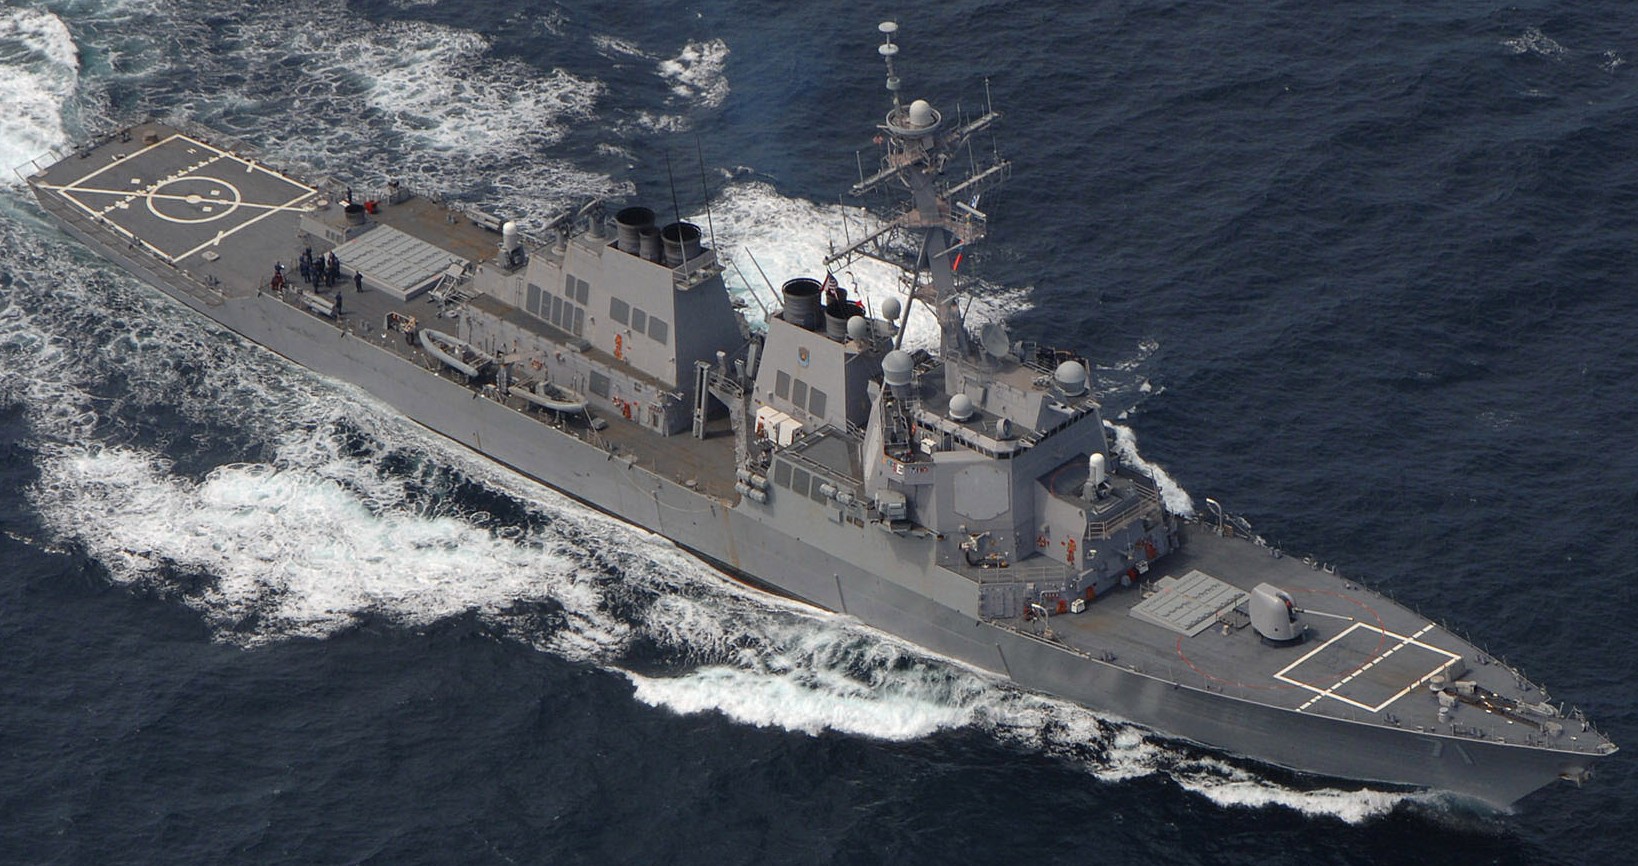 ddg-71 uss ross guided missile destroyer arleigh burke class aegis bmd 97